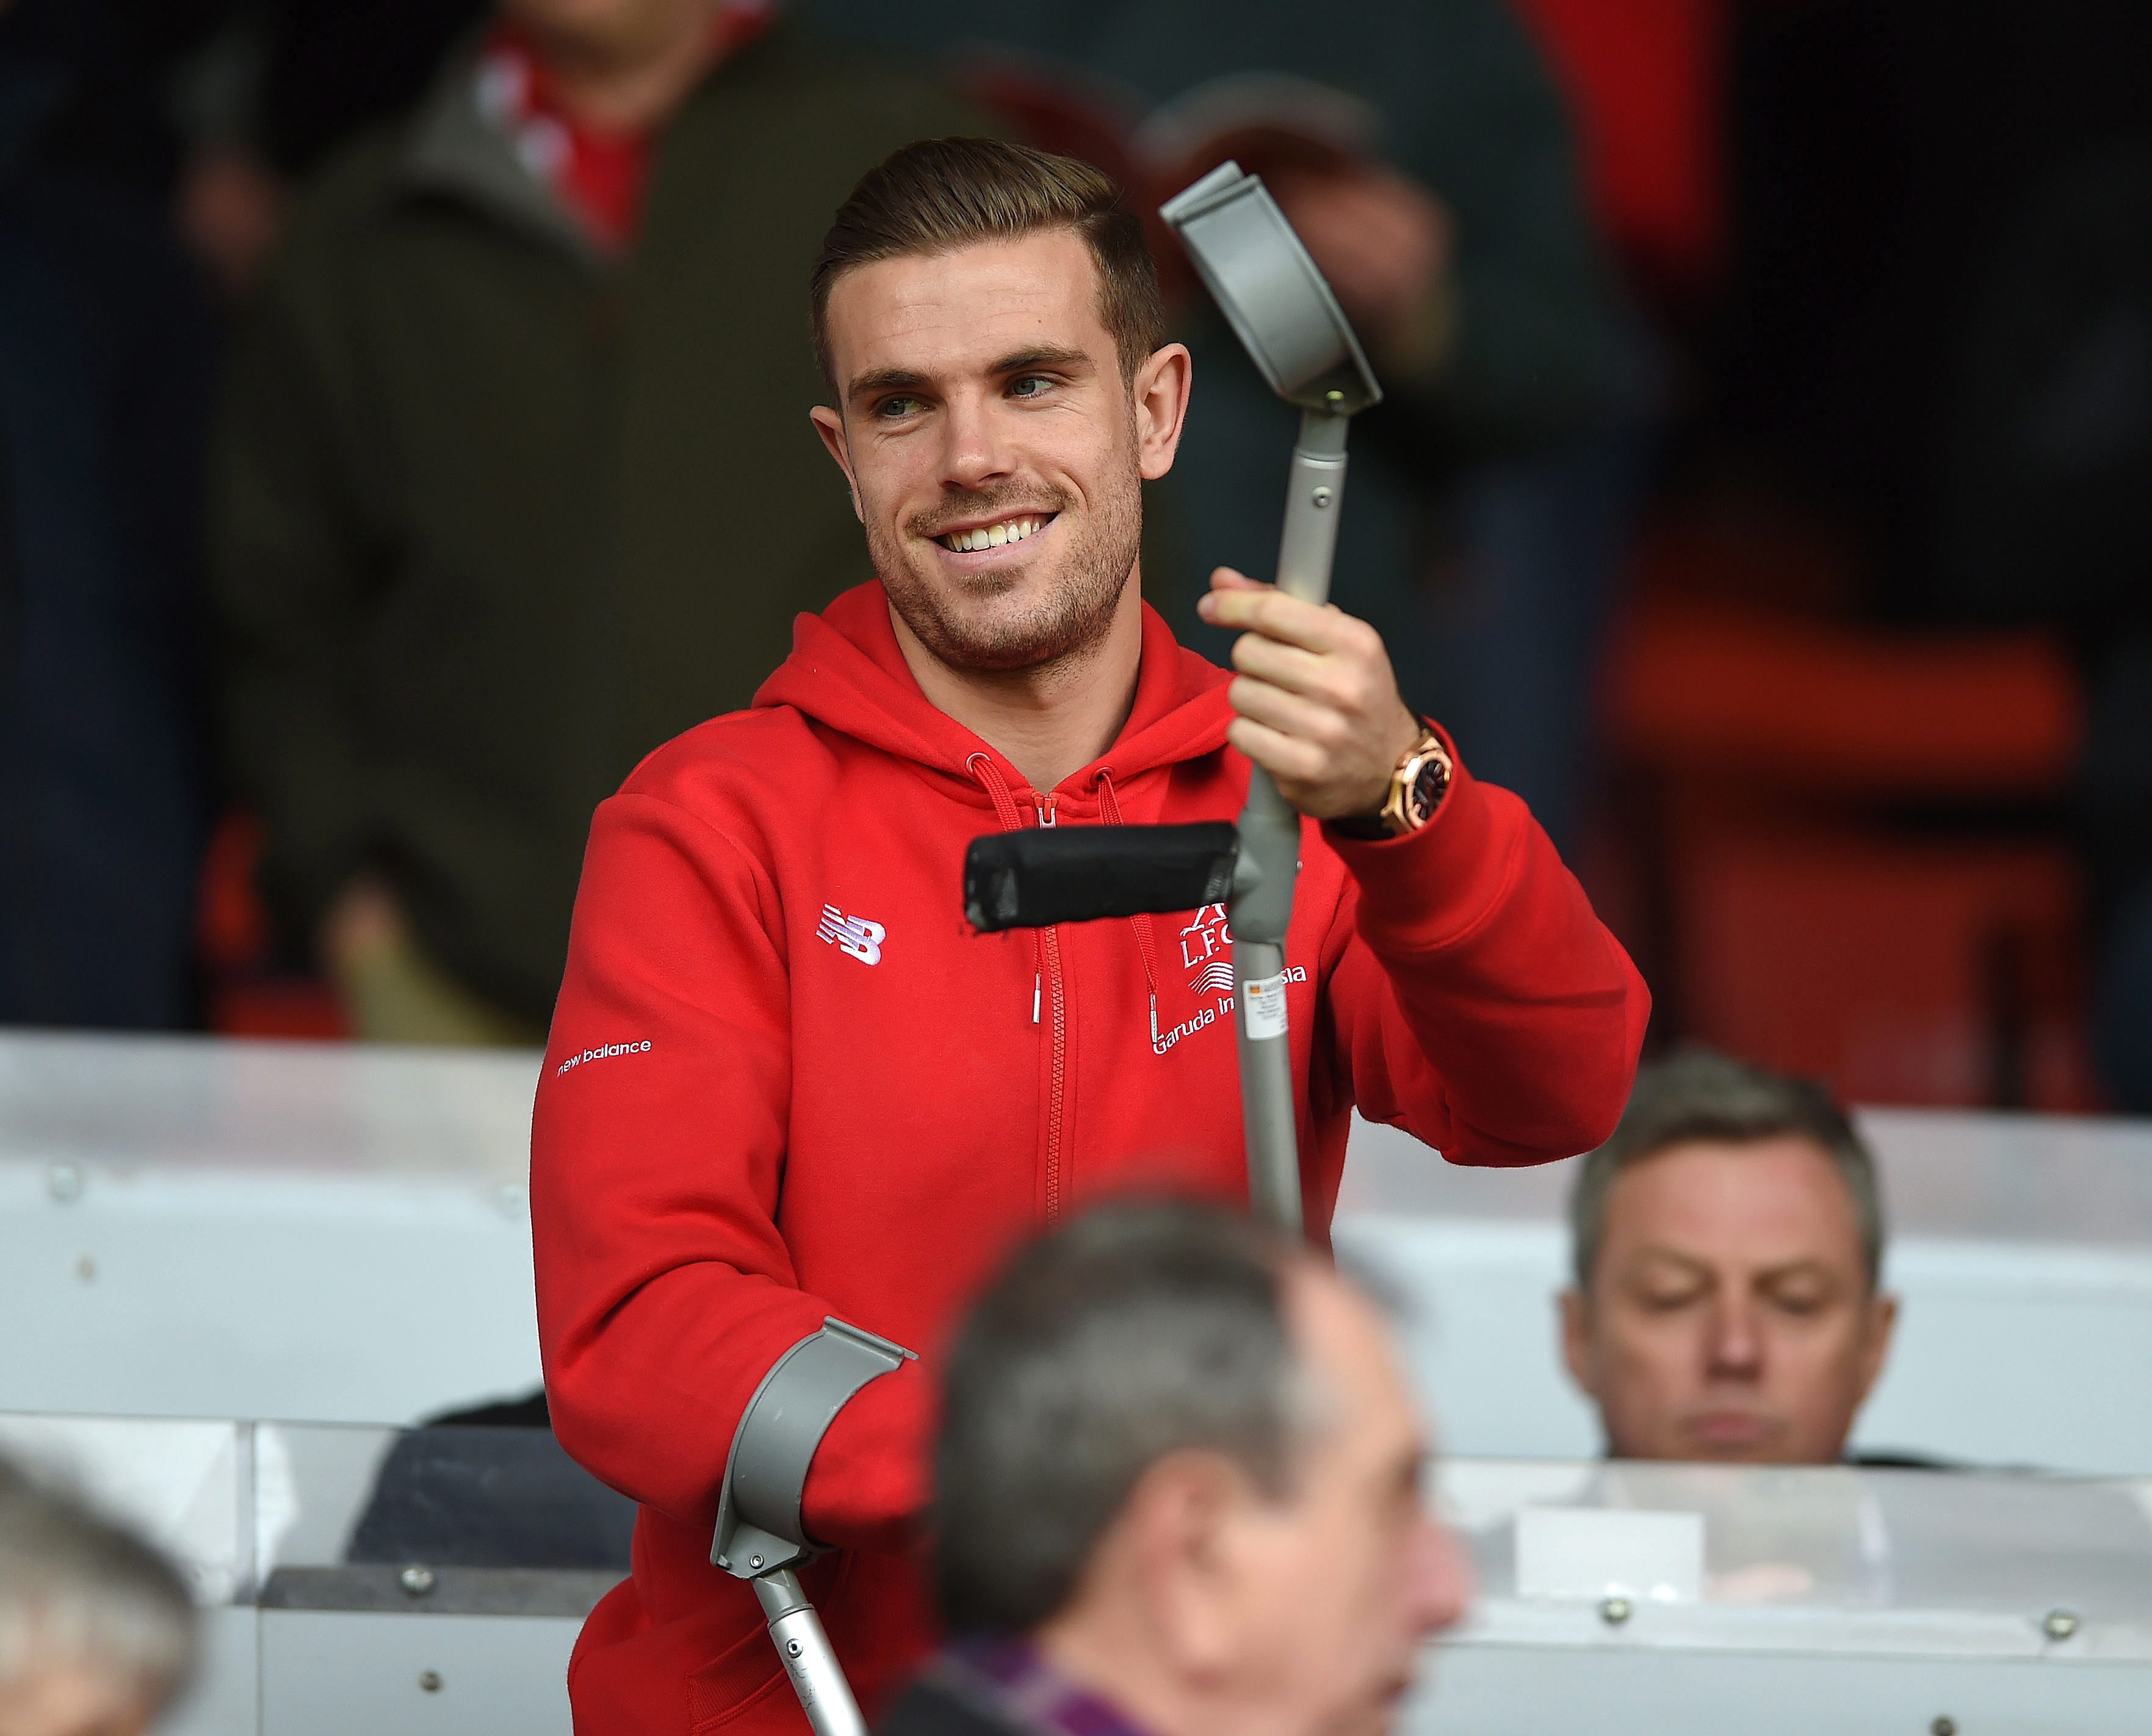 epa05252877 Liverpool's Jordan Henderson watches the game from the stands during the English Premier League soccer match between Liverpool and Stoke City at the Anfield, Manchester, Britain, 10 April 2016.  EPA/PETER POWELL EDITORIAL USE ONLY. No use with unauthorized audio, video, data, fixture lists, club/league logos or 'live' services. Online in-match use limited to 75 images, no video emulation. No use in betting, games or single club/league/player publications